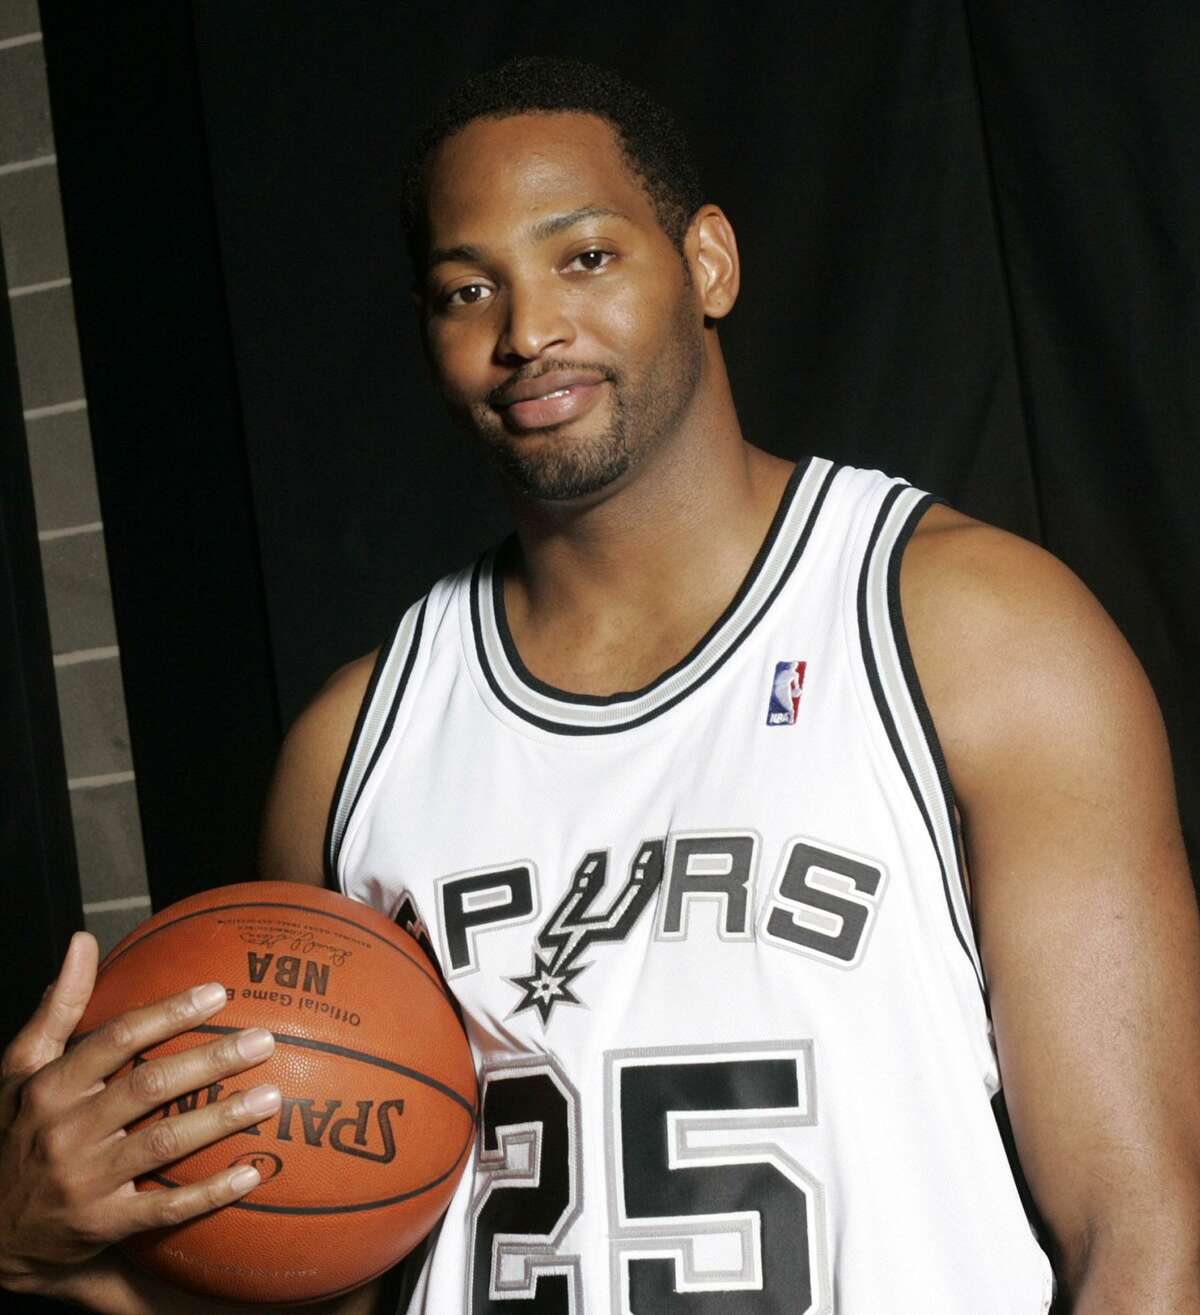 Robert Horry poses at the Spurs media day in San Antonio on Oct. 1, 2007.